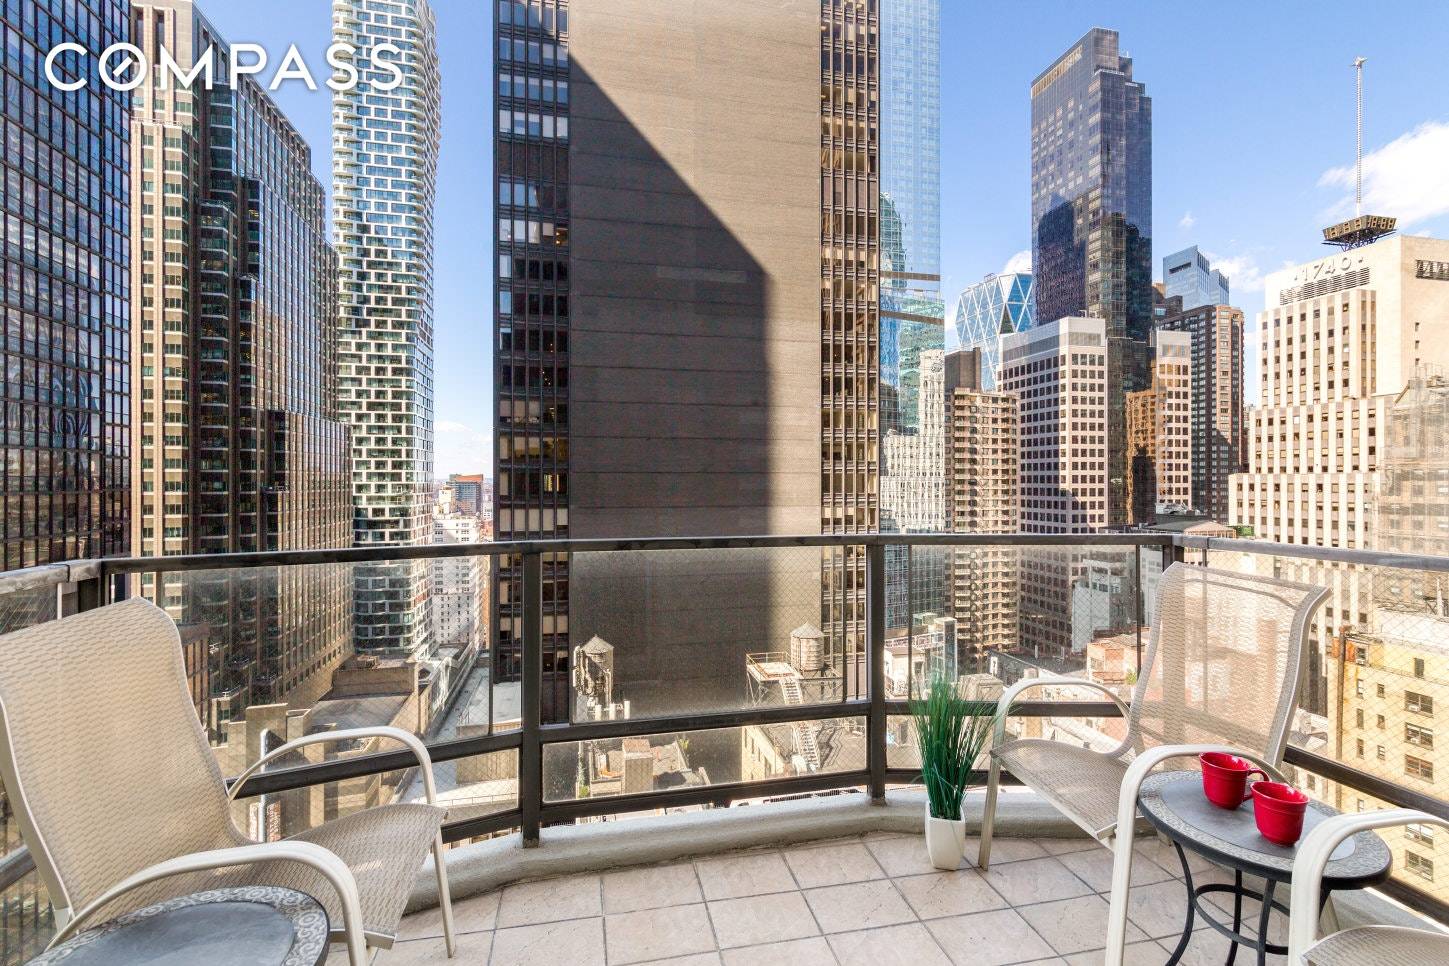 VIDEO TOUR AVAILABLE ON REQUEST Welcome home to your spacious one bedroom condominium with private balcony at Tower 53 in the heart of Manhattan !